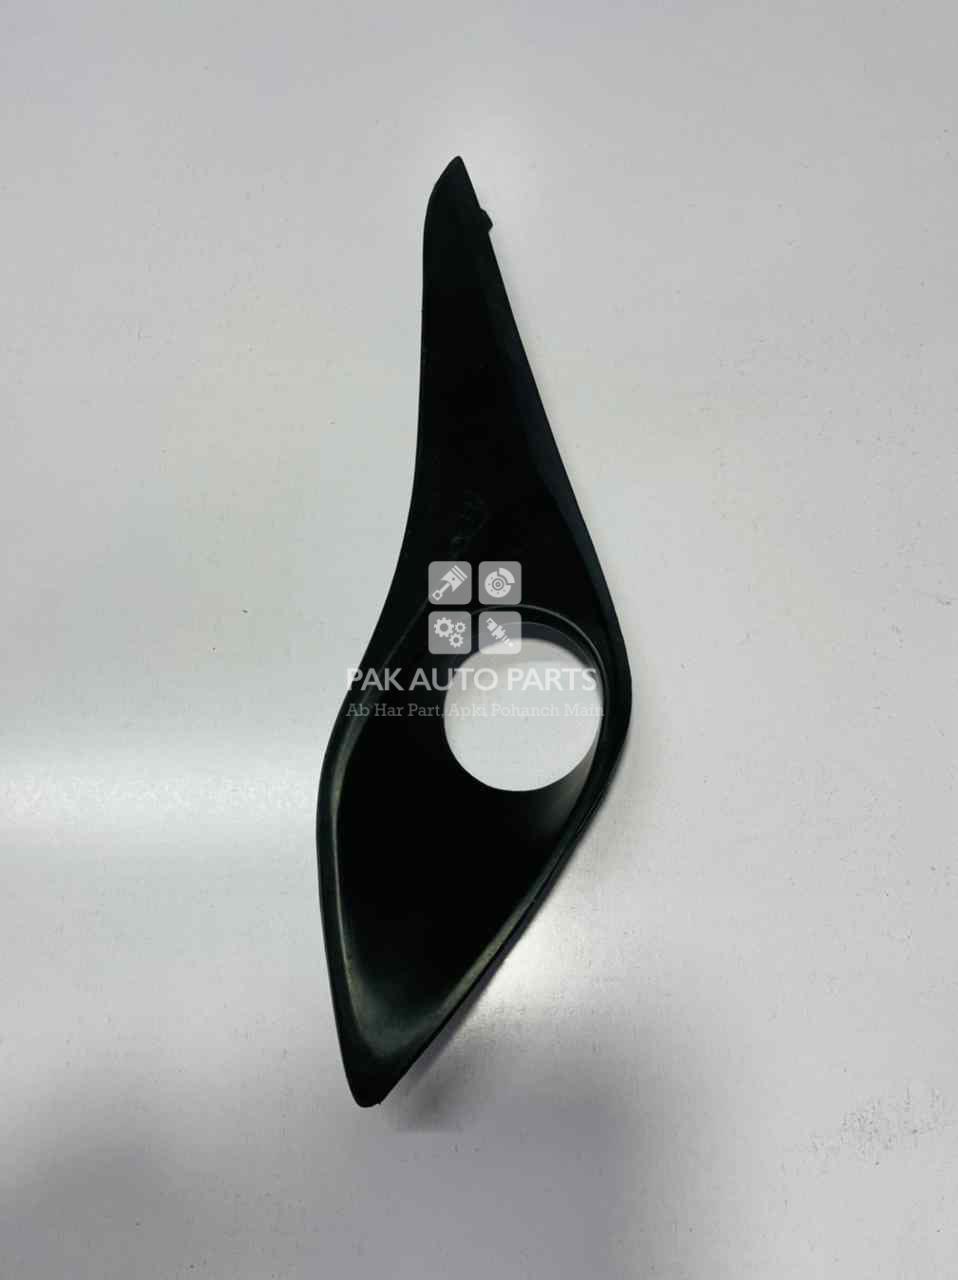 Picture of Toyota Yaris 2020-21 Fog Light (Lamp) Cover With Hole